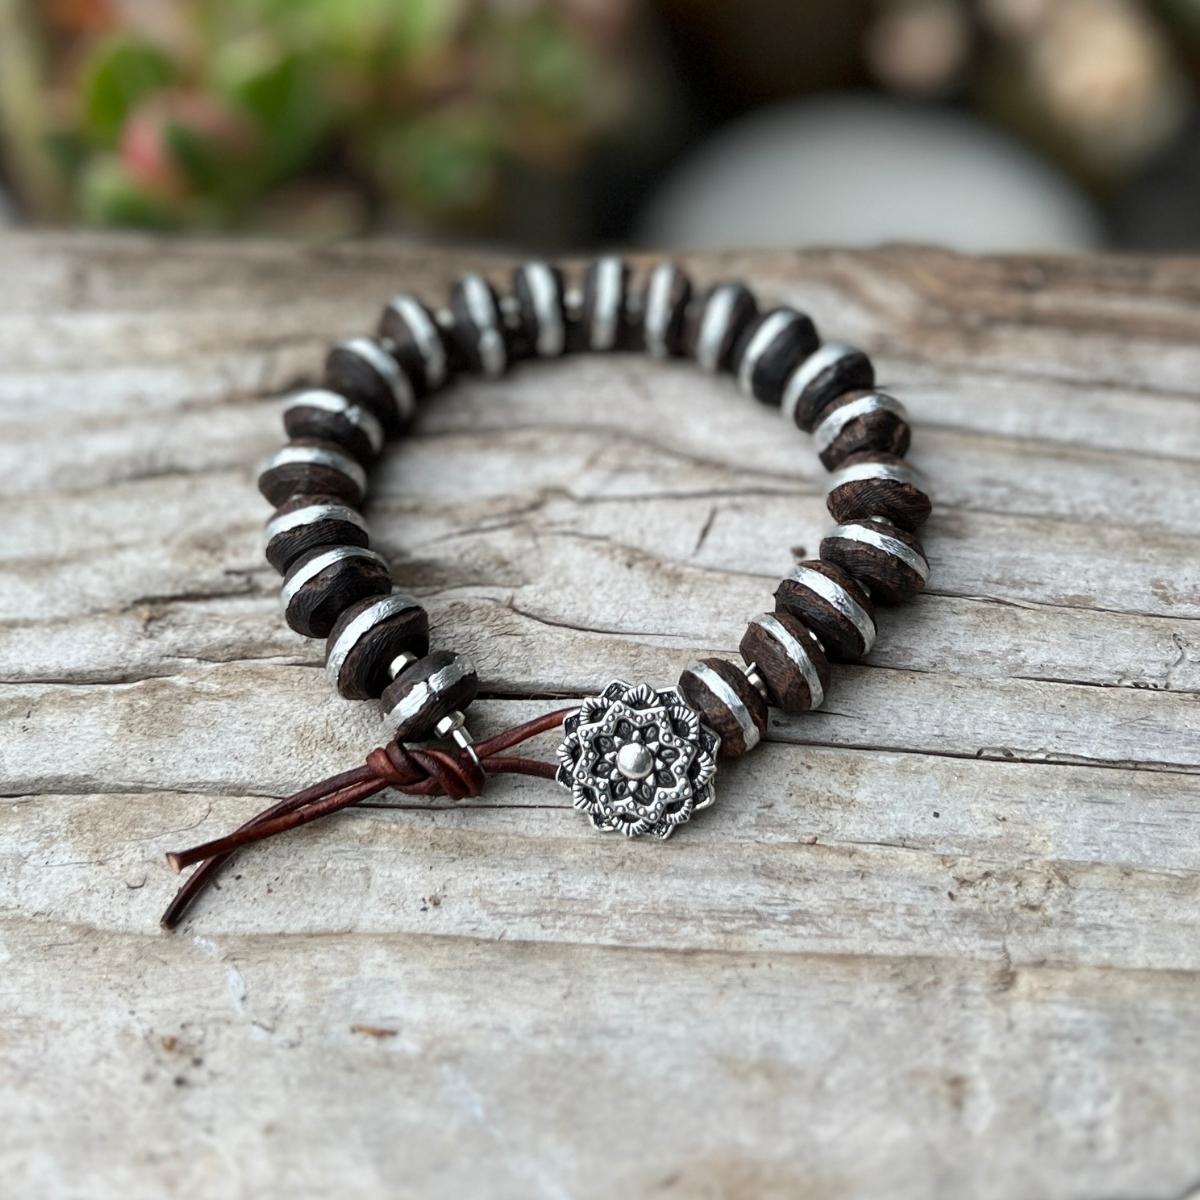 The "Ebony Tranquility Mandala Bracelet" is a striking accessory crafted for both men and women who appreciate substantial, larger pieces that seamlessly blend elegance with the meaningful symbolism of the mandala.